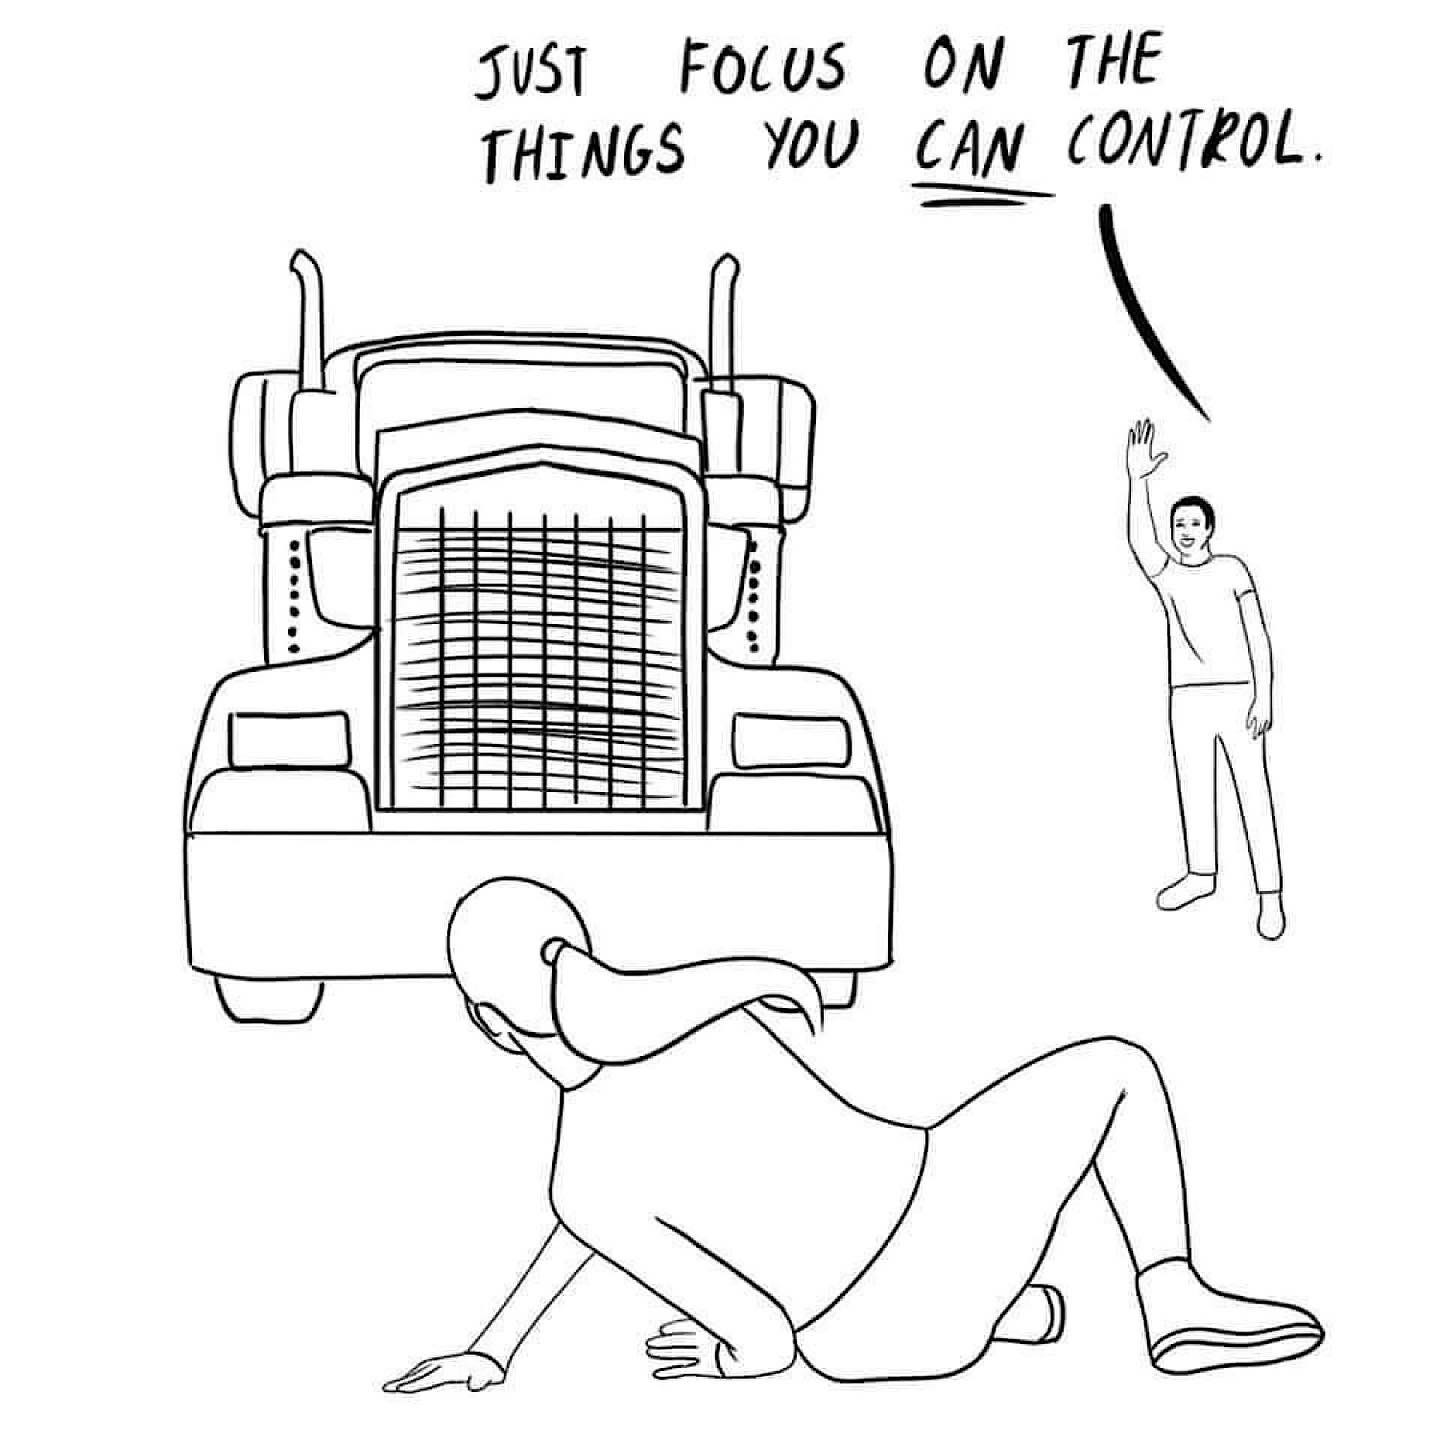 An illustration of a woman about it get run over by a truck. A man off to the side is smiling and waving and says "just focus on the things you can control"